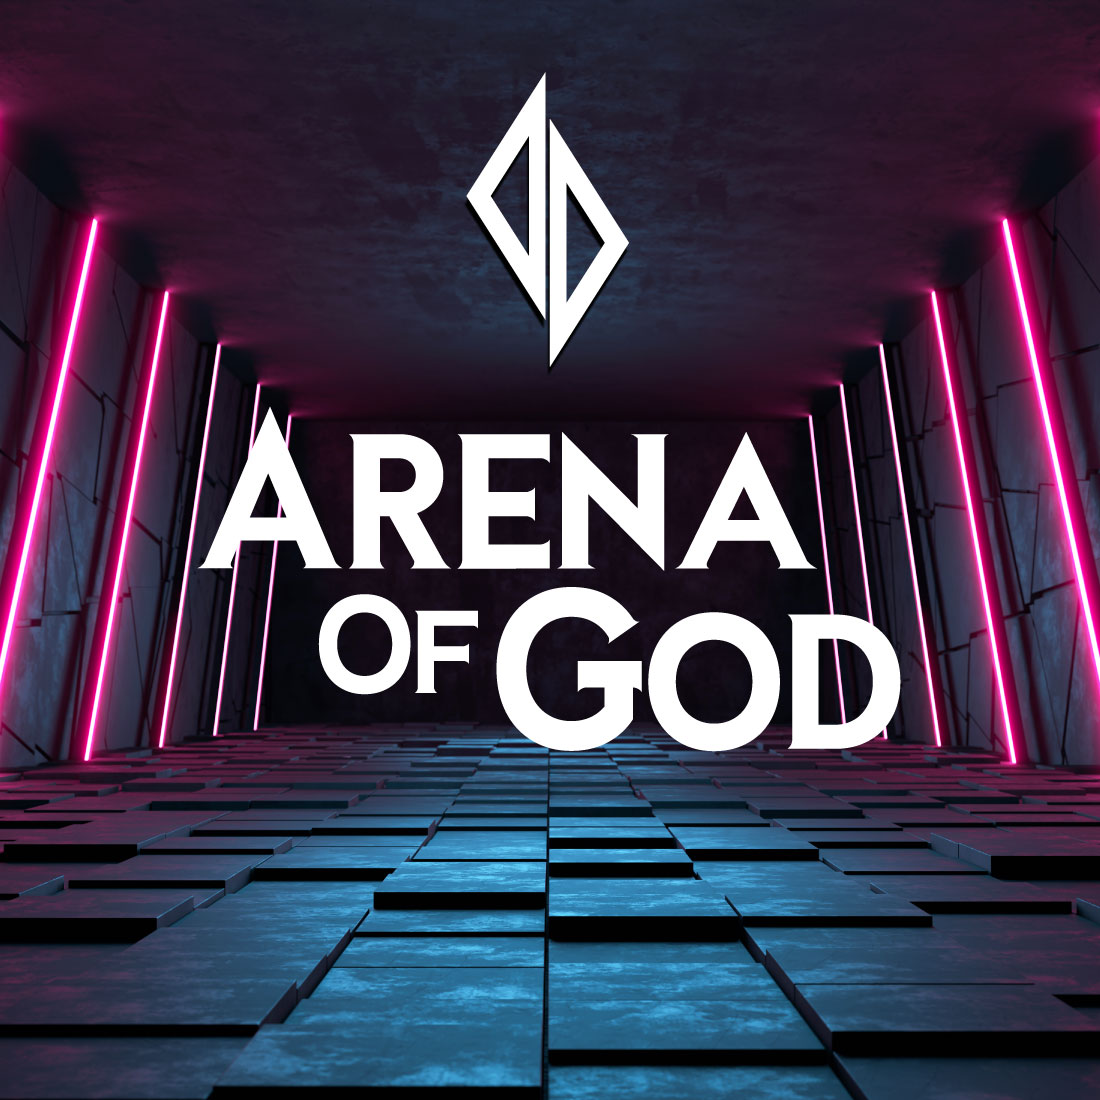 ARENA OF GOD FONT cover image.